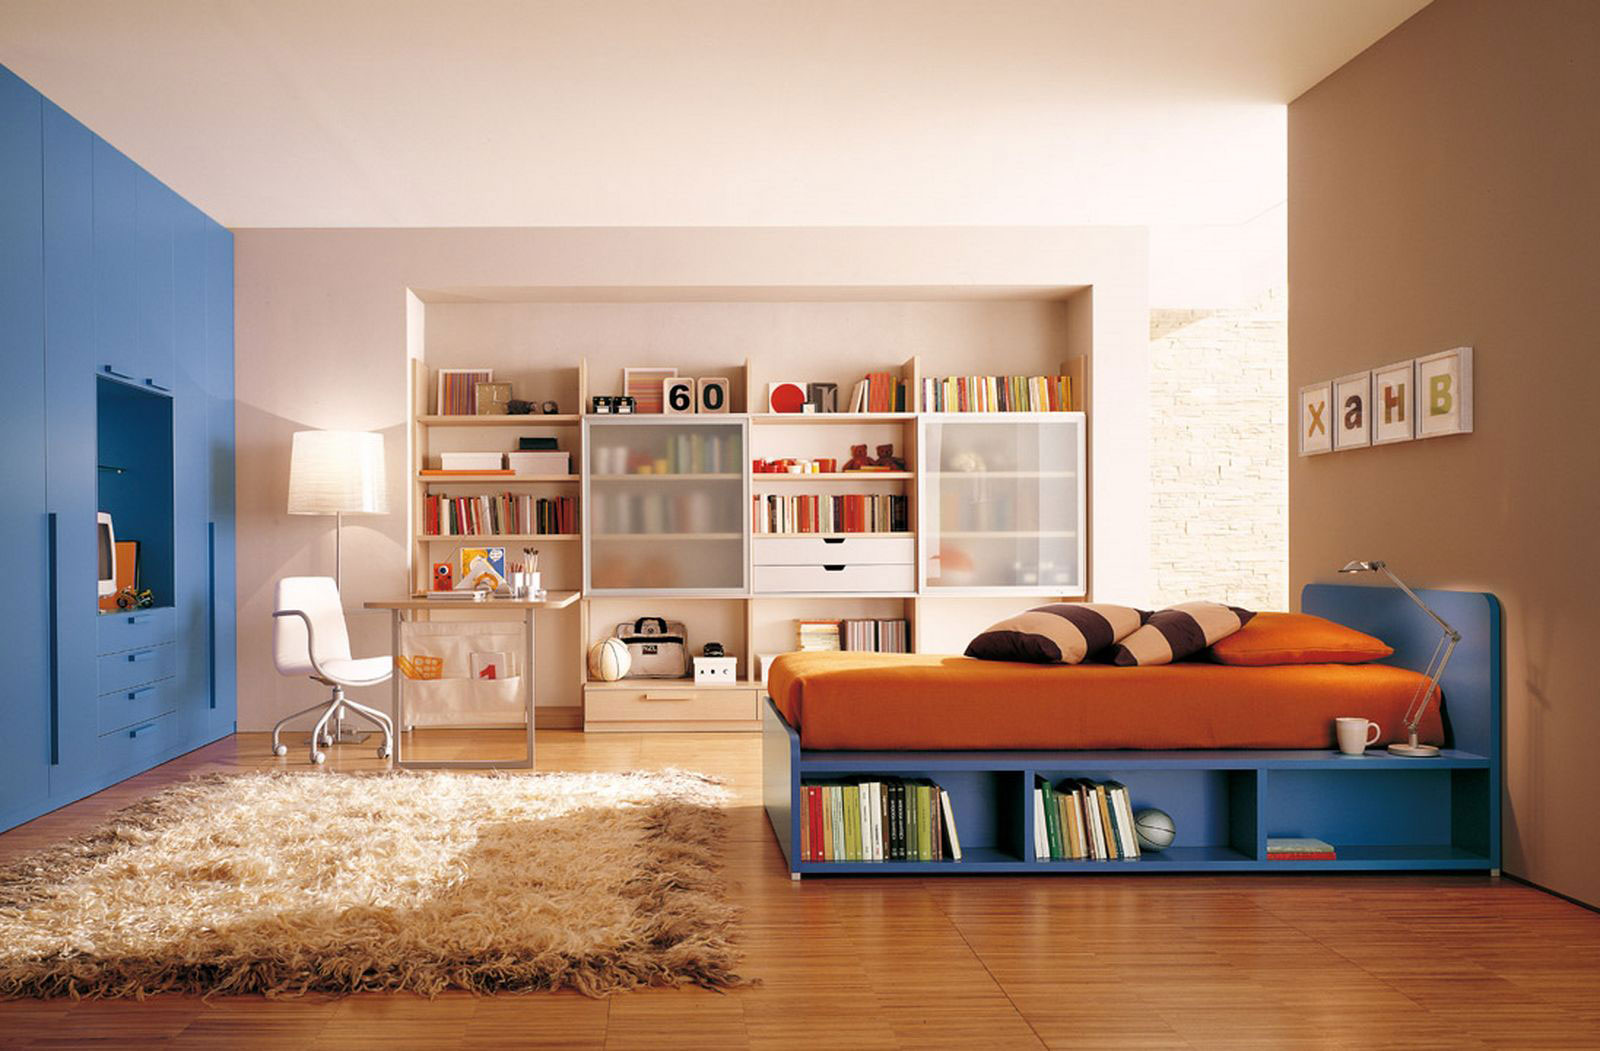 Kid Room Wooden Captivating Kid Room Ideas Applying Wooden Flooring With Soft Rug Furnished With Orange Bed On Blue Platform Cabinet And Completed With Desk Sets Also Flooring Stand Lighting Kids Room 15 Trendy Kids Room Ideas For The Bold Modern Home